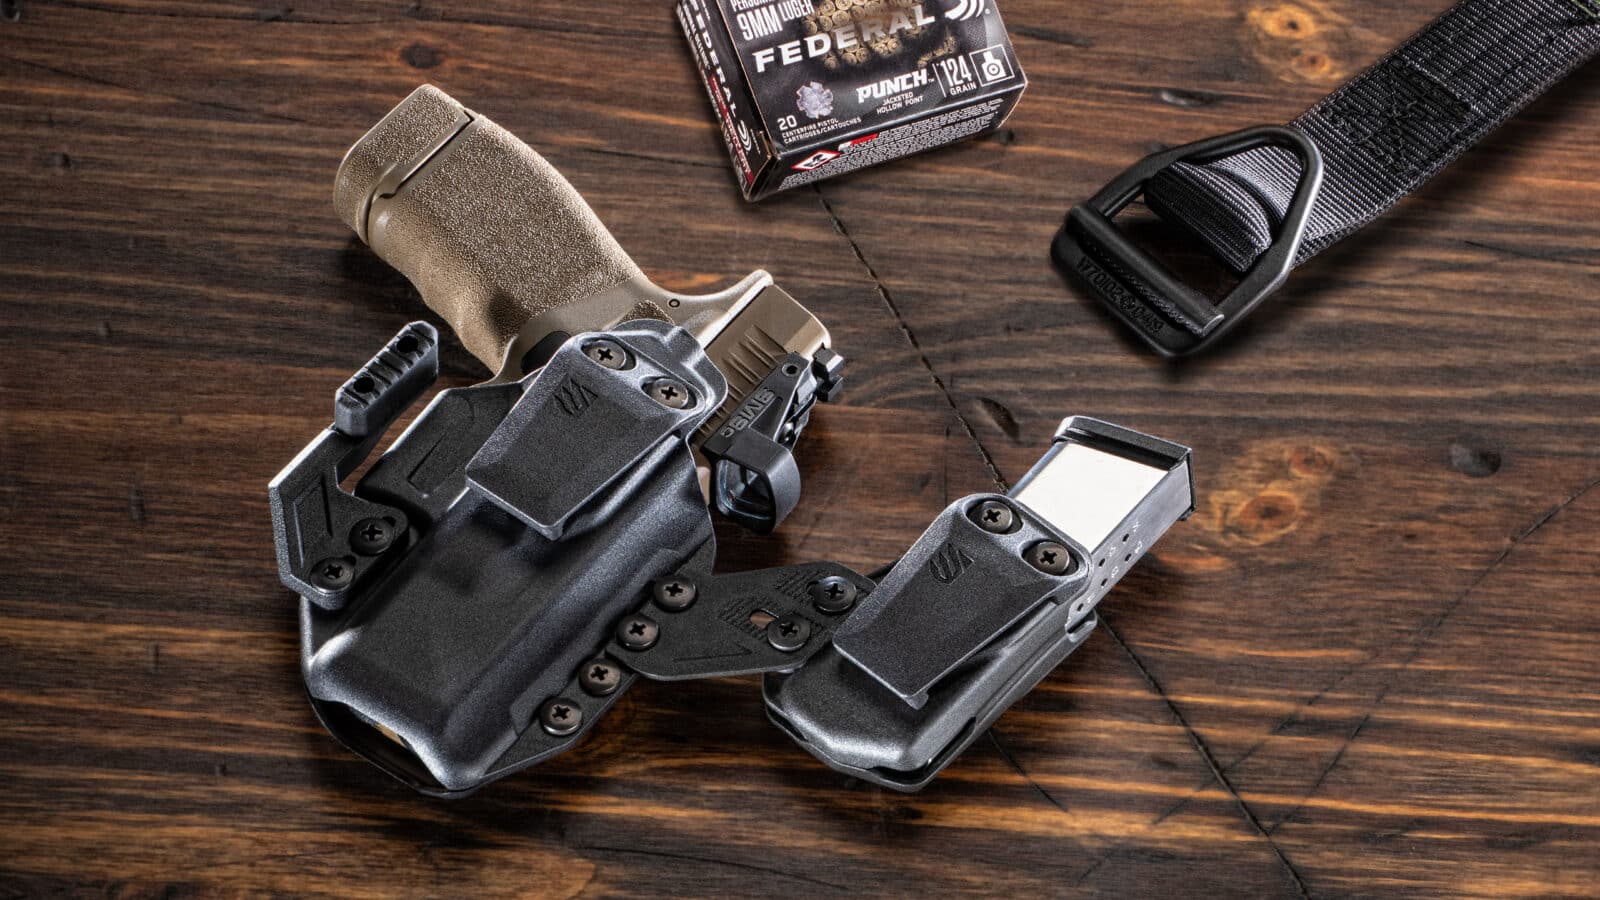 In this photograph, we see the Blackhawk Stache holster reviewed by the author. In addition we see a gun belt, the Springfield Armory Hellcat Pro FDE 9mm pistol and Federal Ammunition in 9x19mm Parabellum.